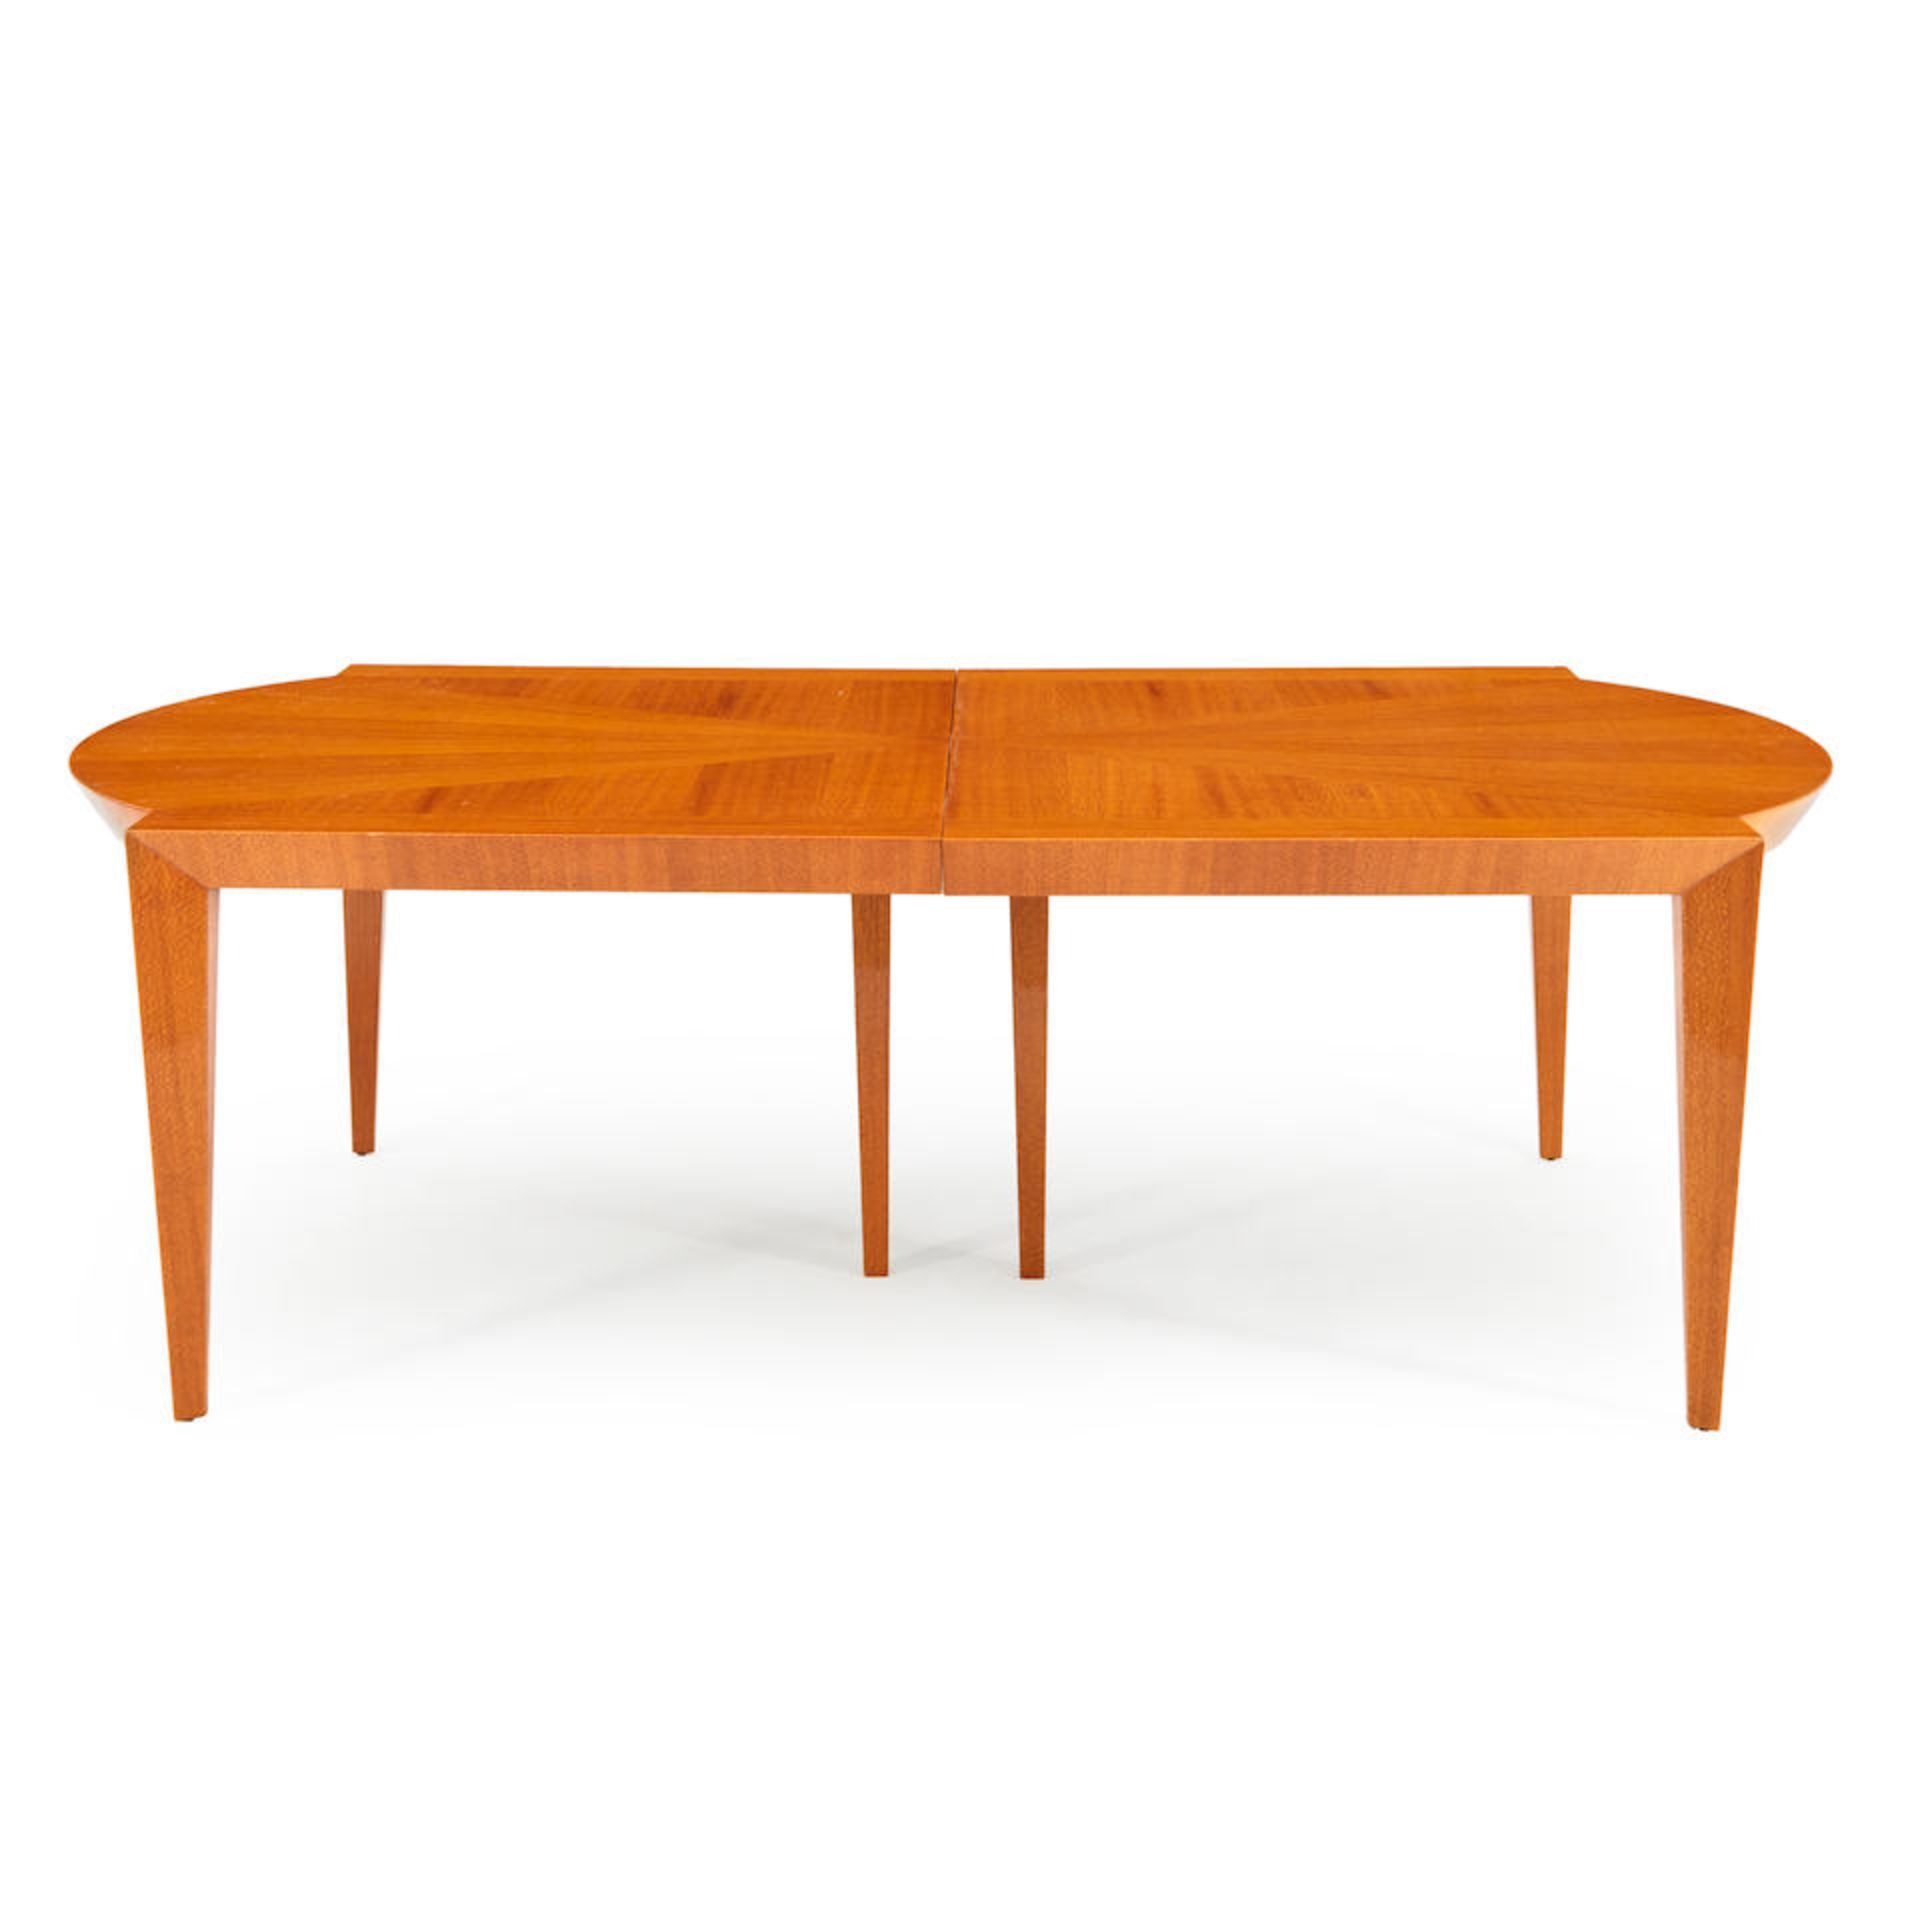 KARELIAN BIRCH DINING TABLE ATTRIBUTED TO DONGHIA